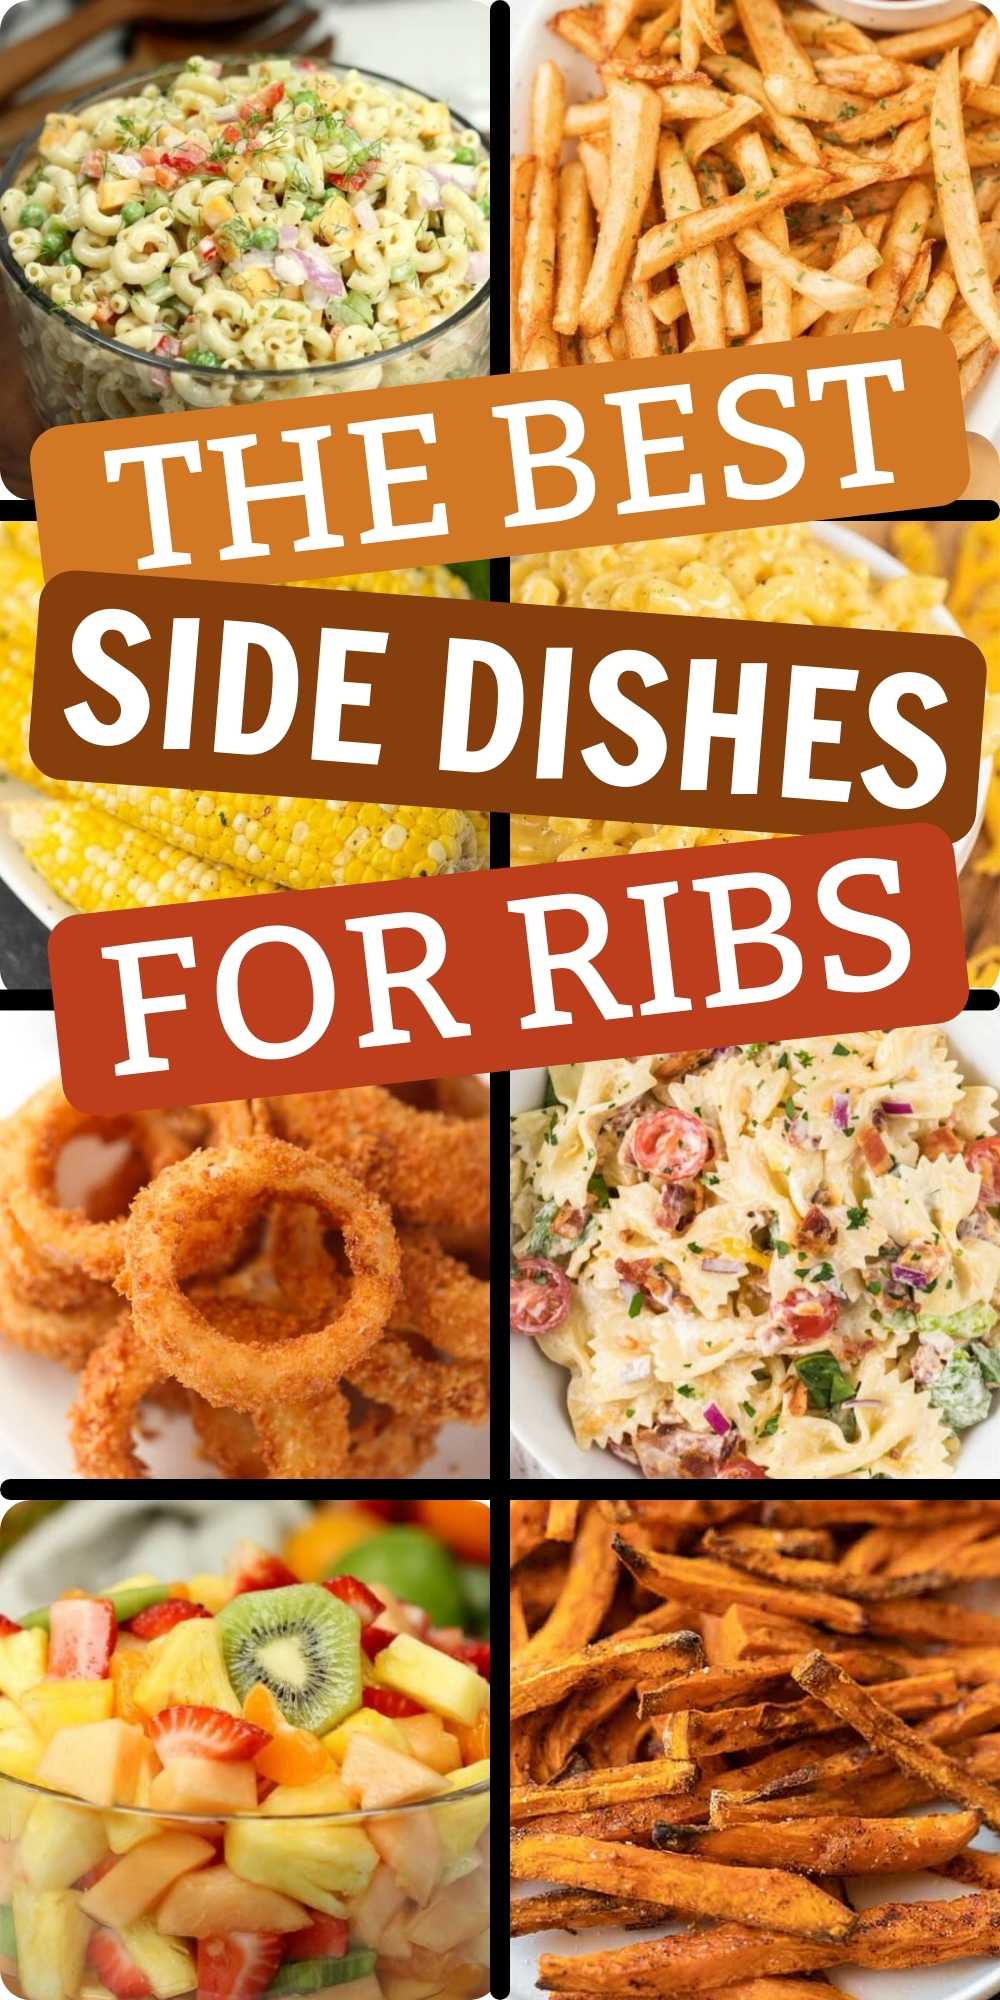 33 sides for ribs you are going to love in less than 30 minutes. Try the best side dishes for ribs that are easy and delicious. These are the best side dishes to serve with ribs to make an easy dinner that the entire family will love.  #eatingonadime #ribsides #sidedishes #sides 
